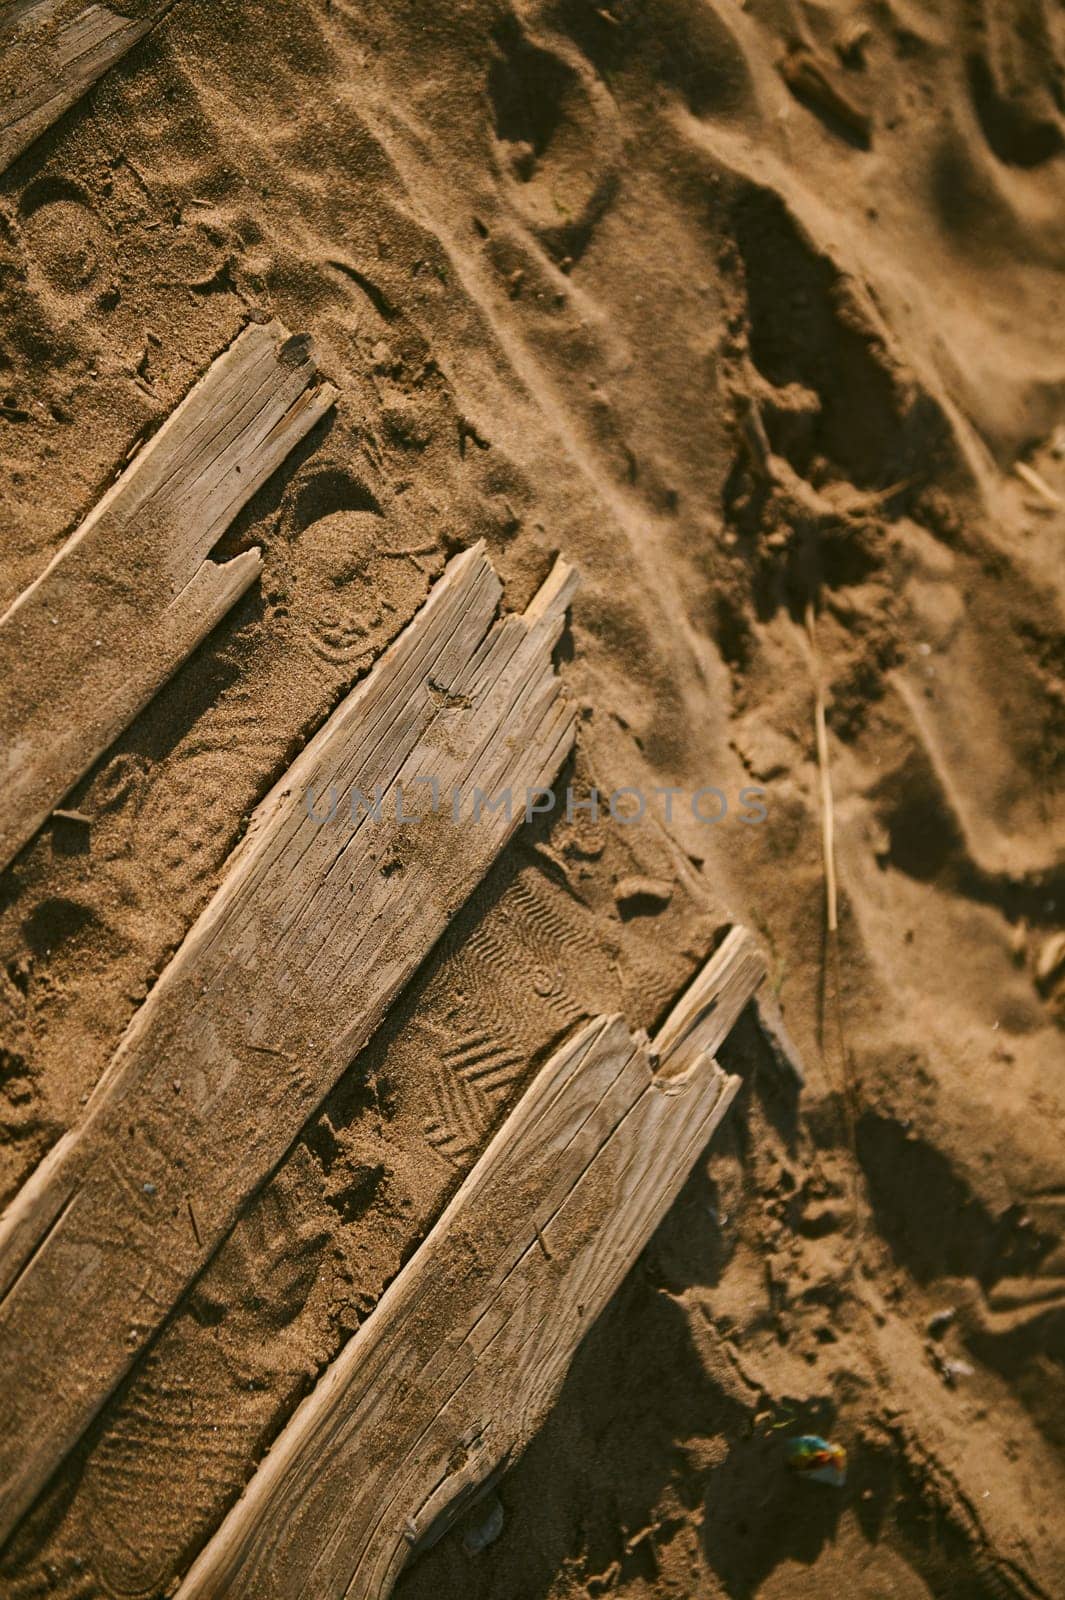 View from above of weathered old damaged wooden boards on the sand.